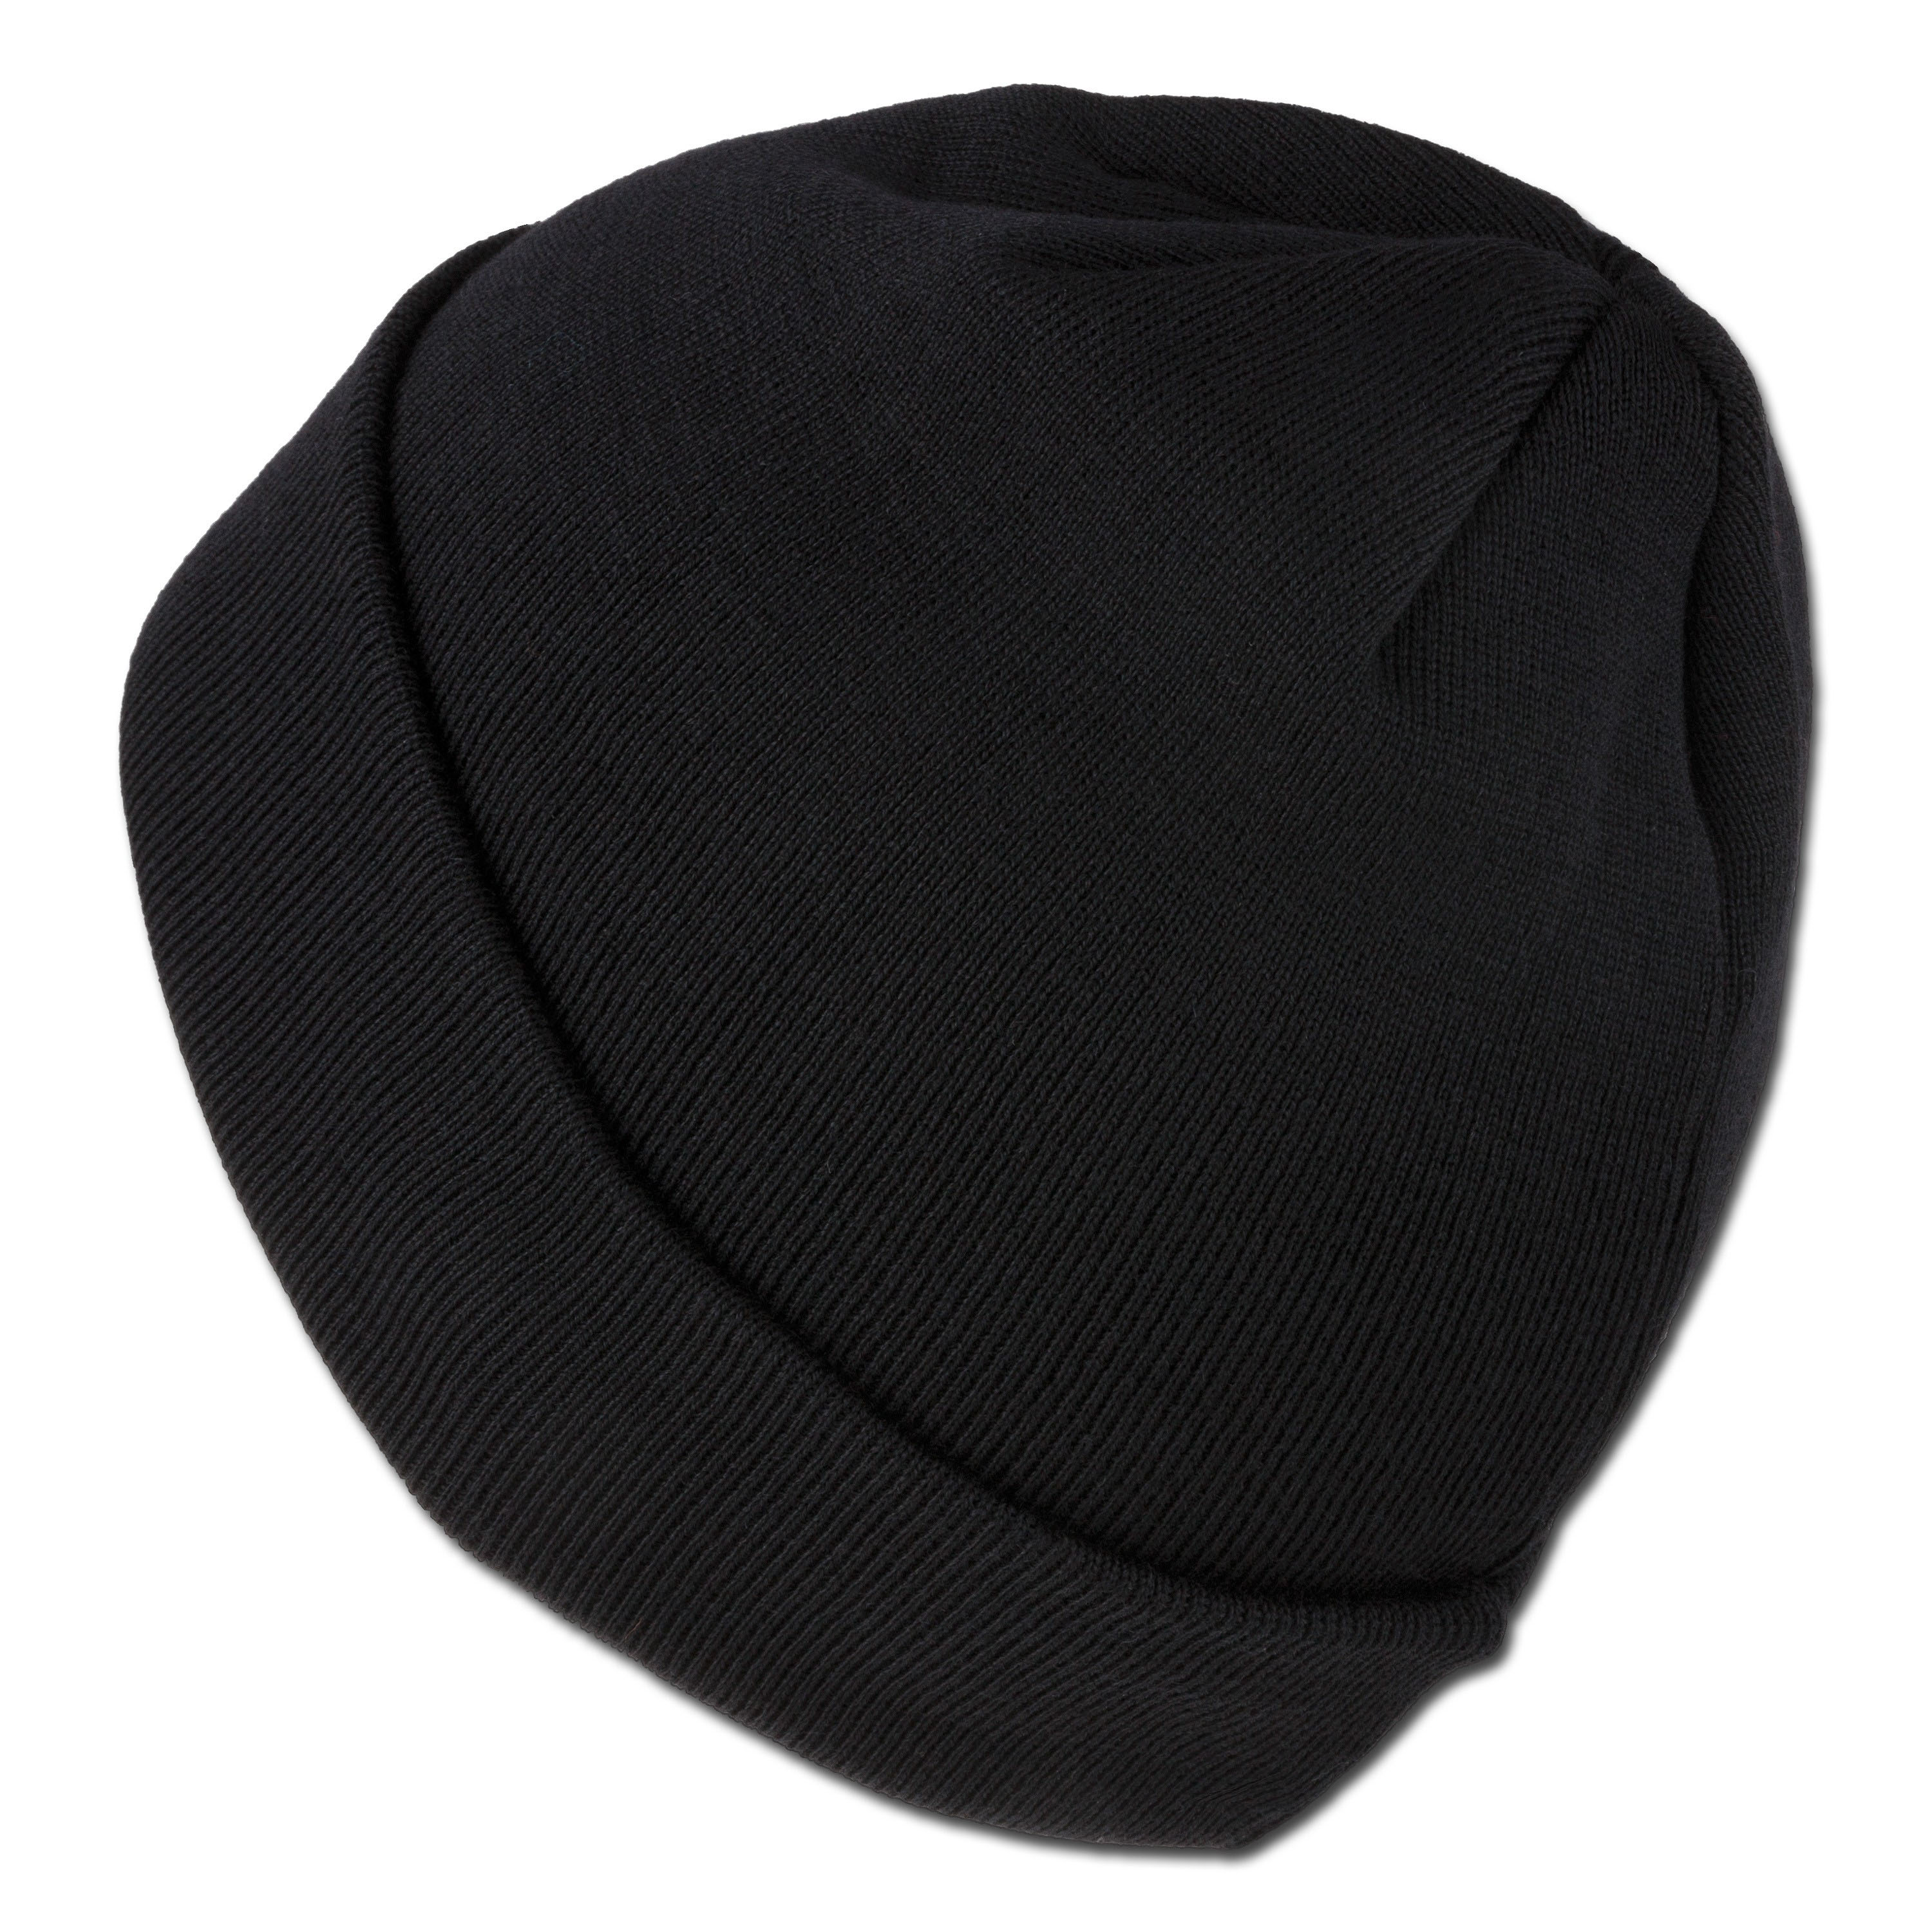 Purchase the NfD Knitted Watch Cap black by ASMC